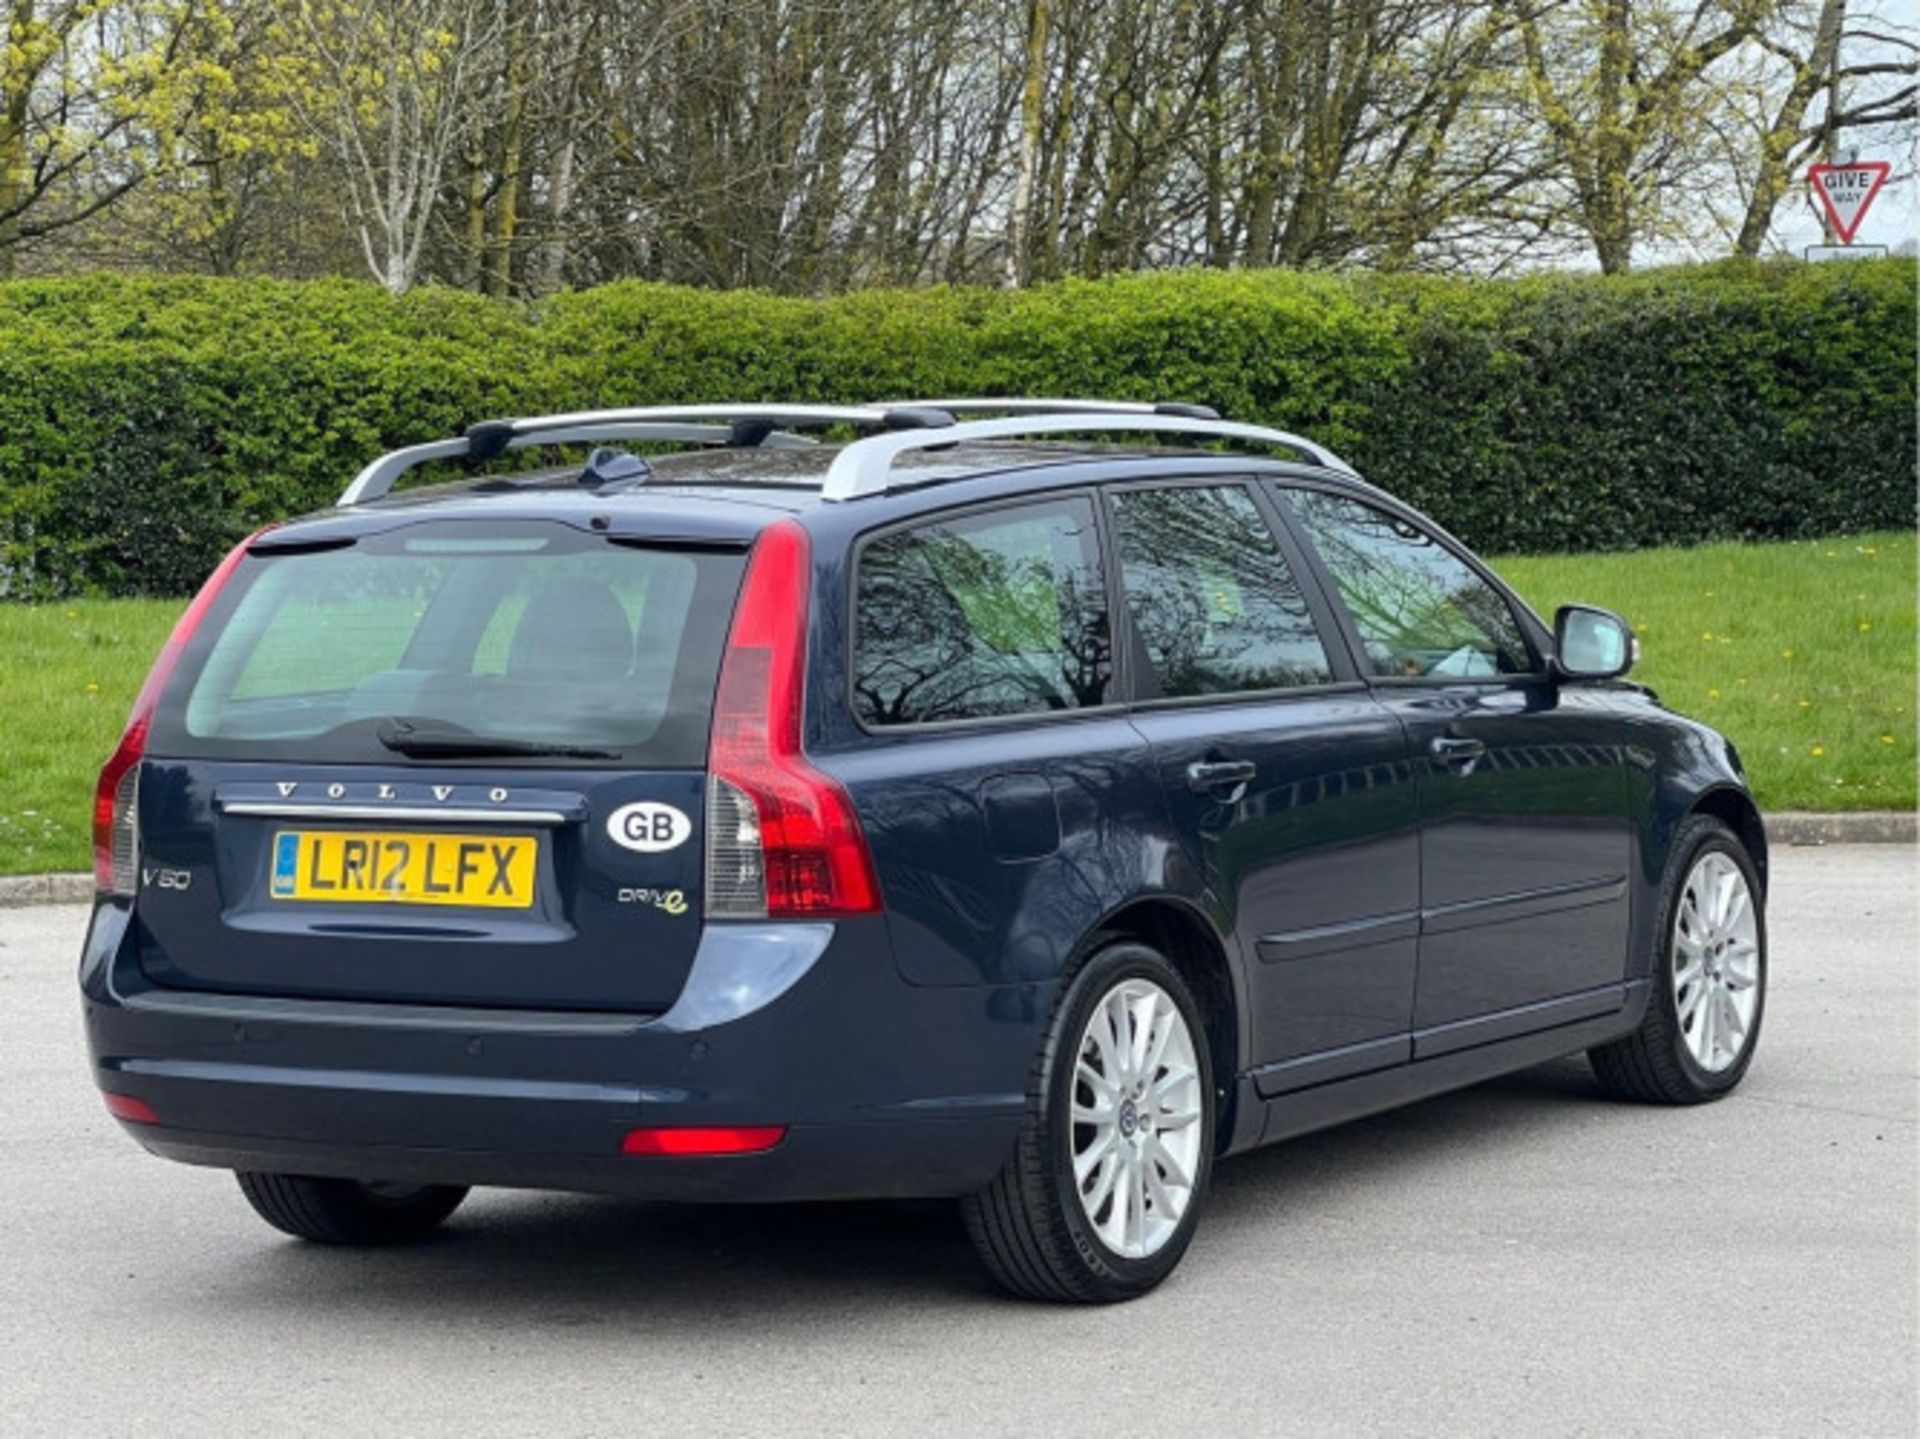 VOLVO V50 1.6D DRIVE SE LUX EDITION EURO 5 (S/S) 5DR (2012) - Image 81 of 88